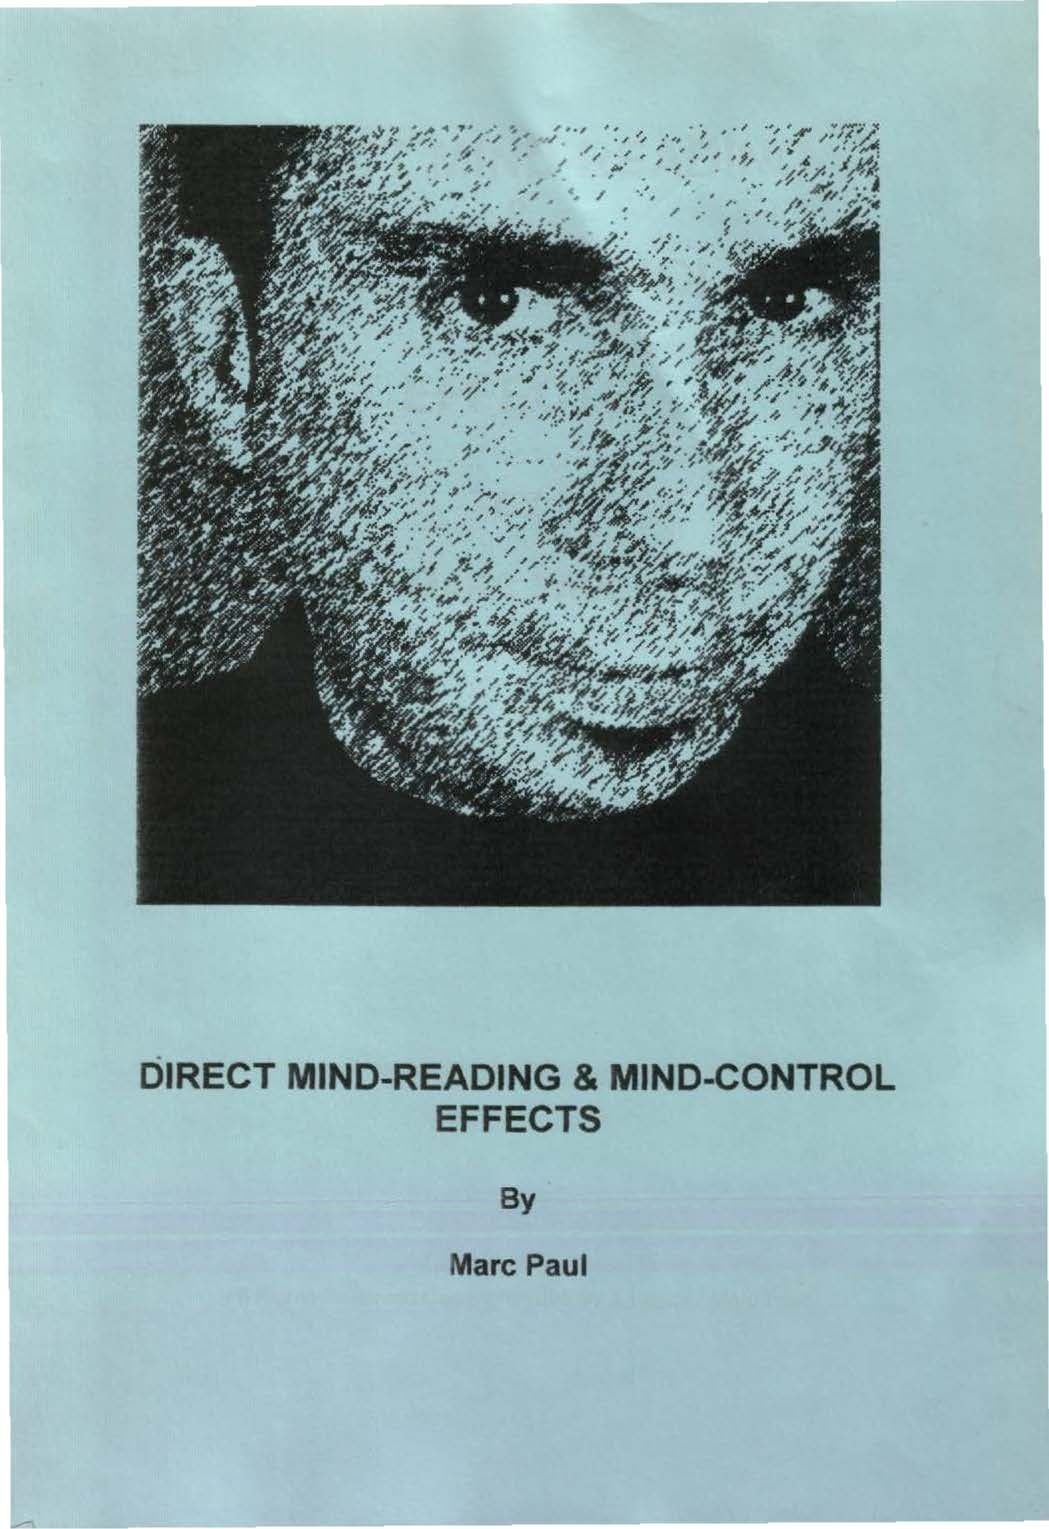 Marc Paul - Direct Mind-Reading & Mind-Control Effects